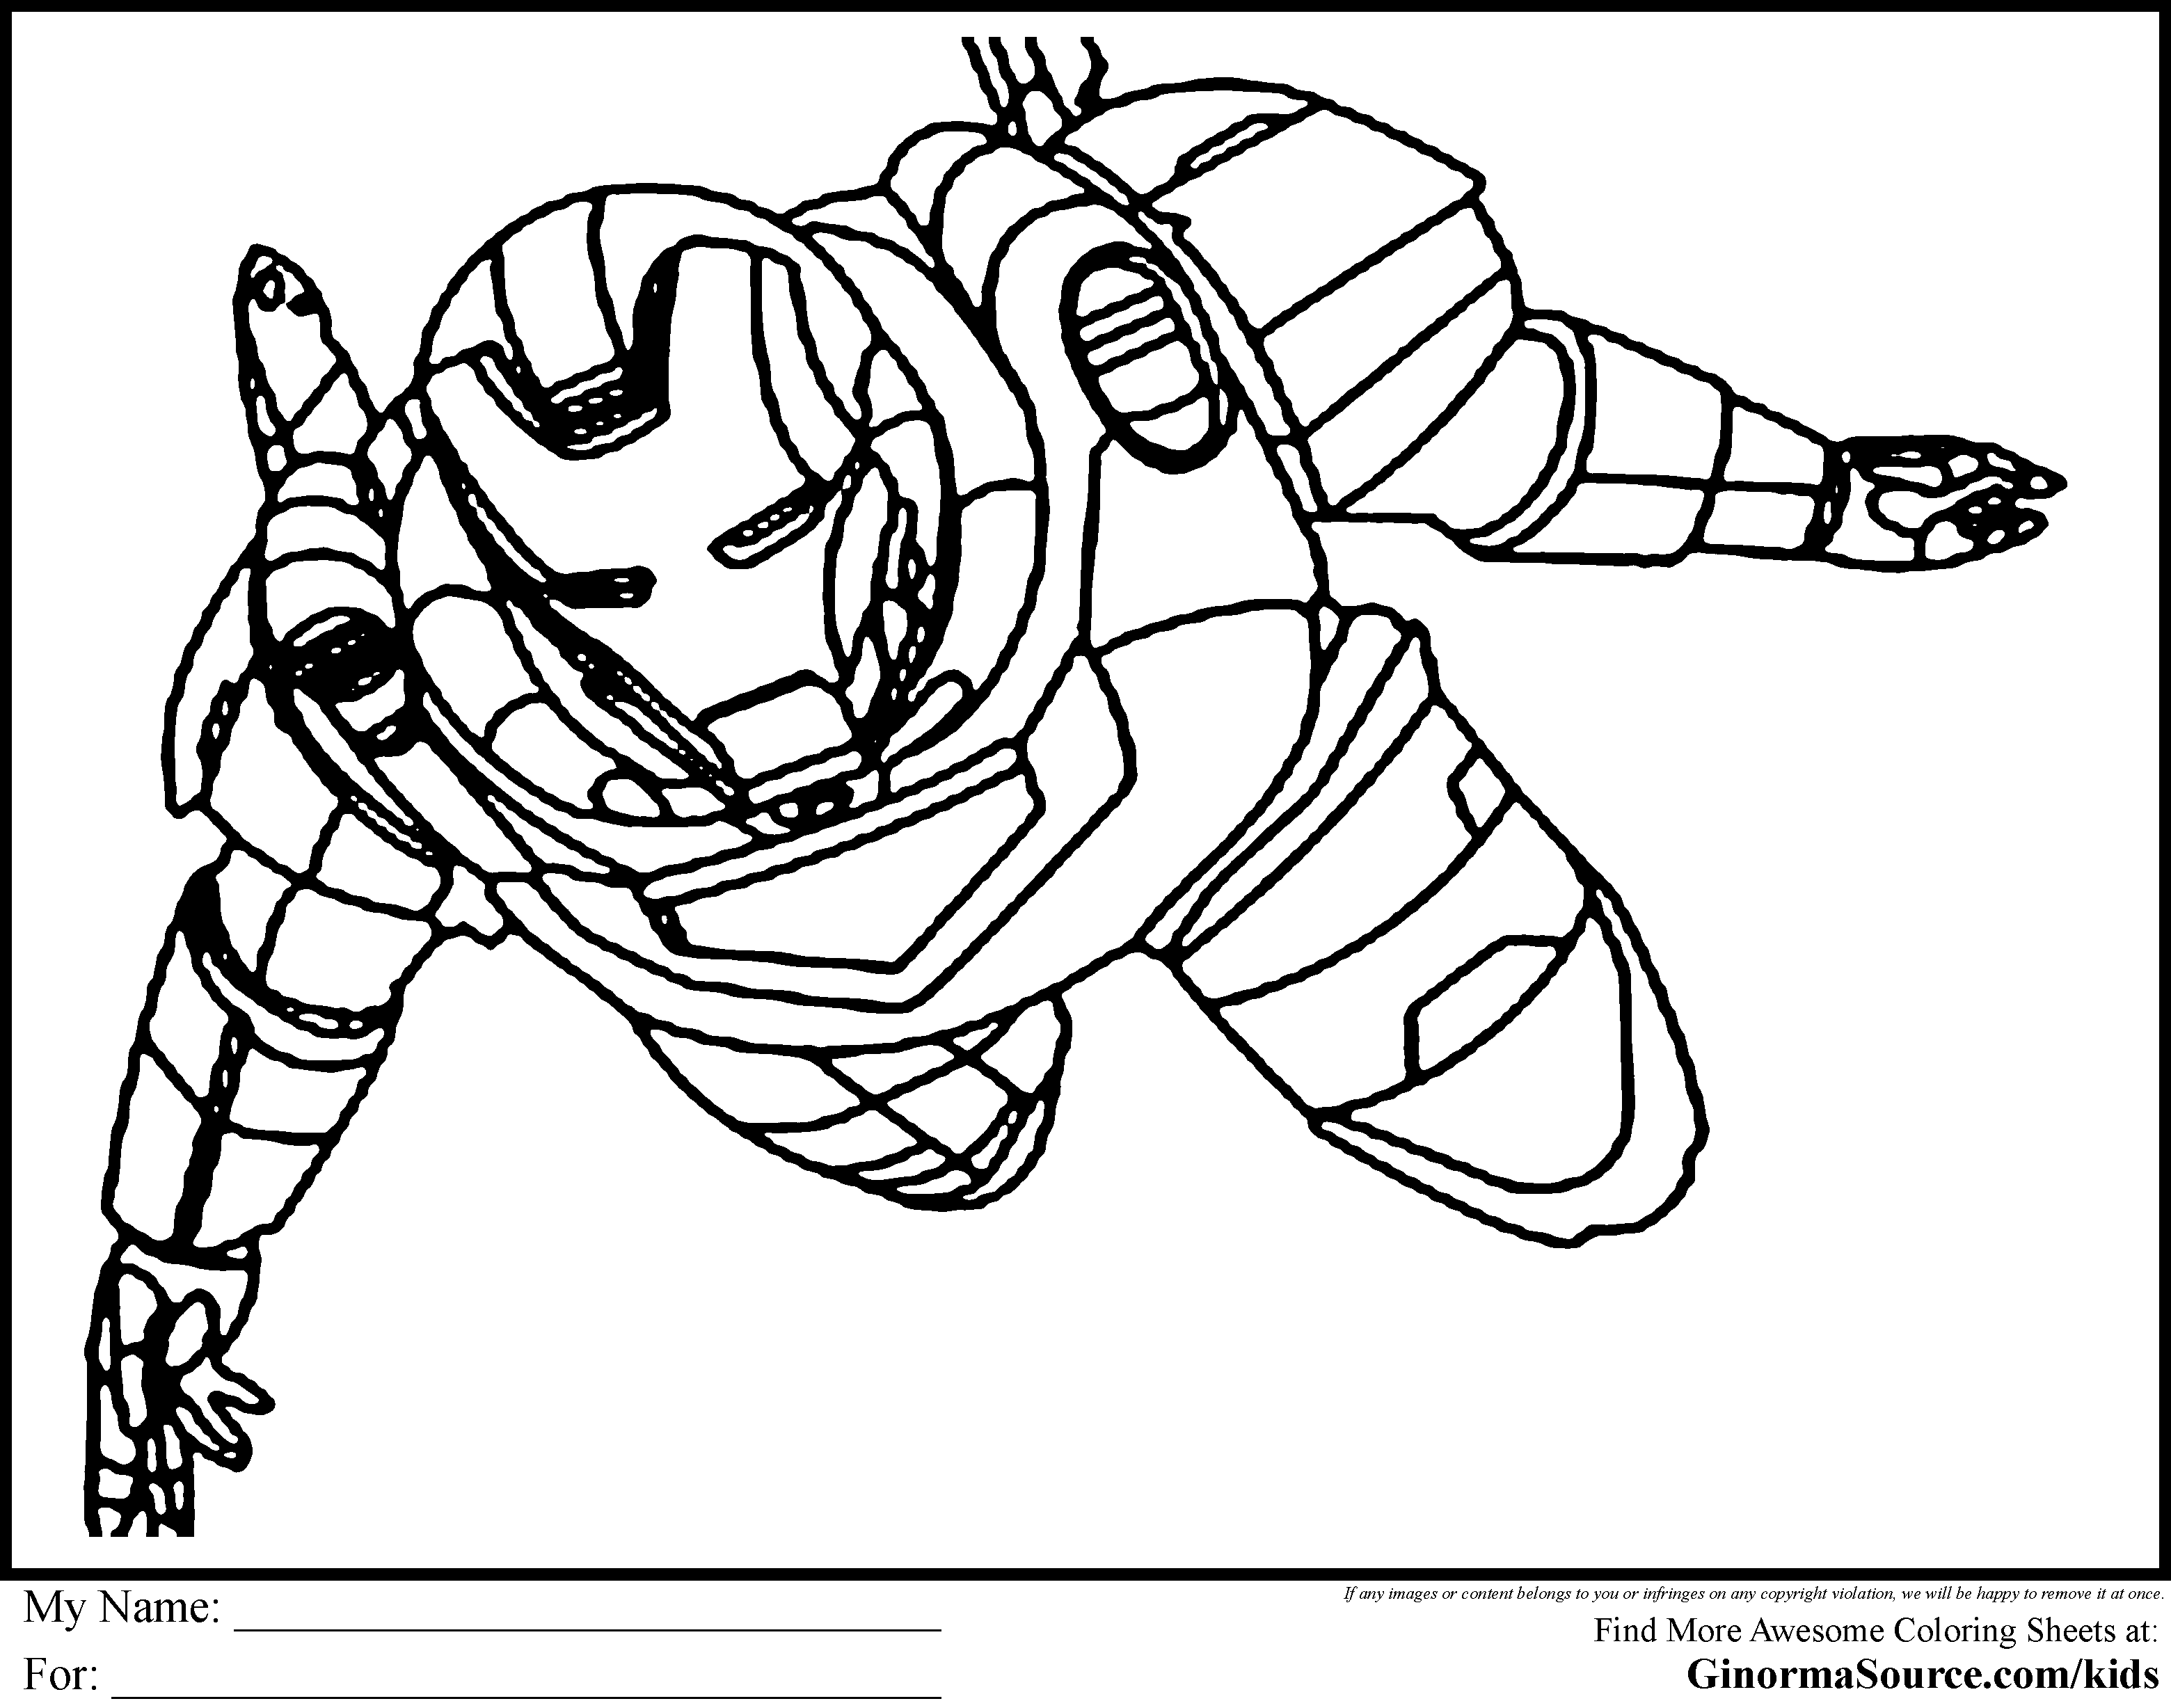 avengers color pages the avengers coloring pages to download and print for free avengers pages color 1 1